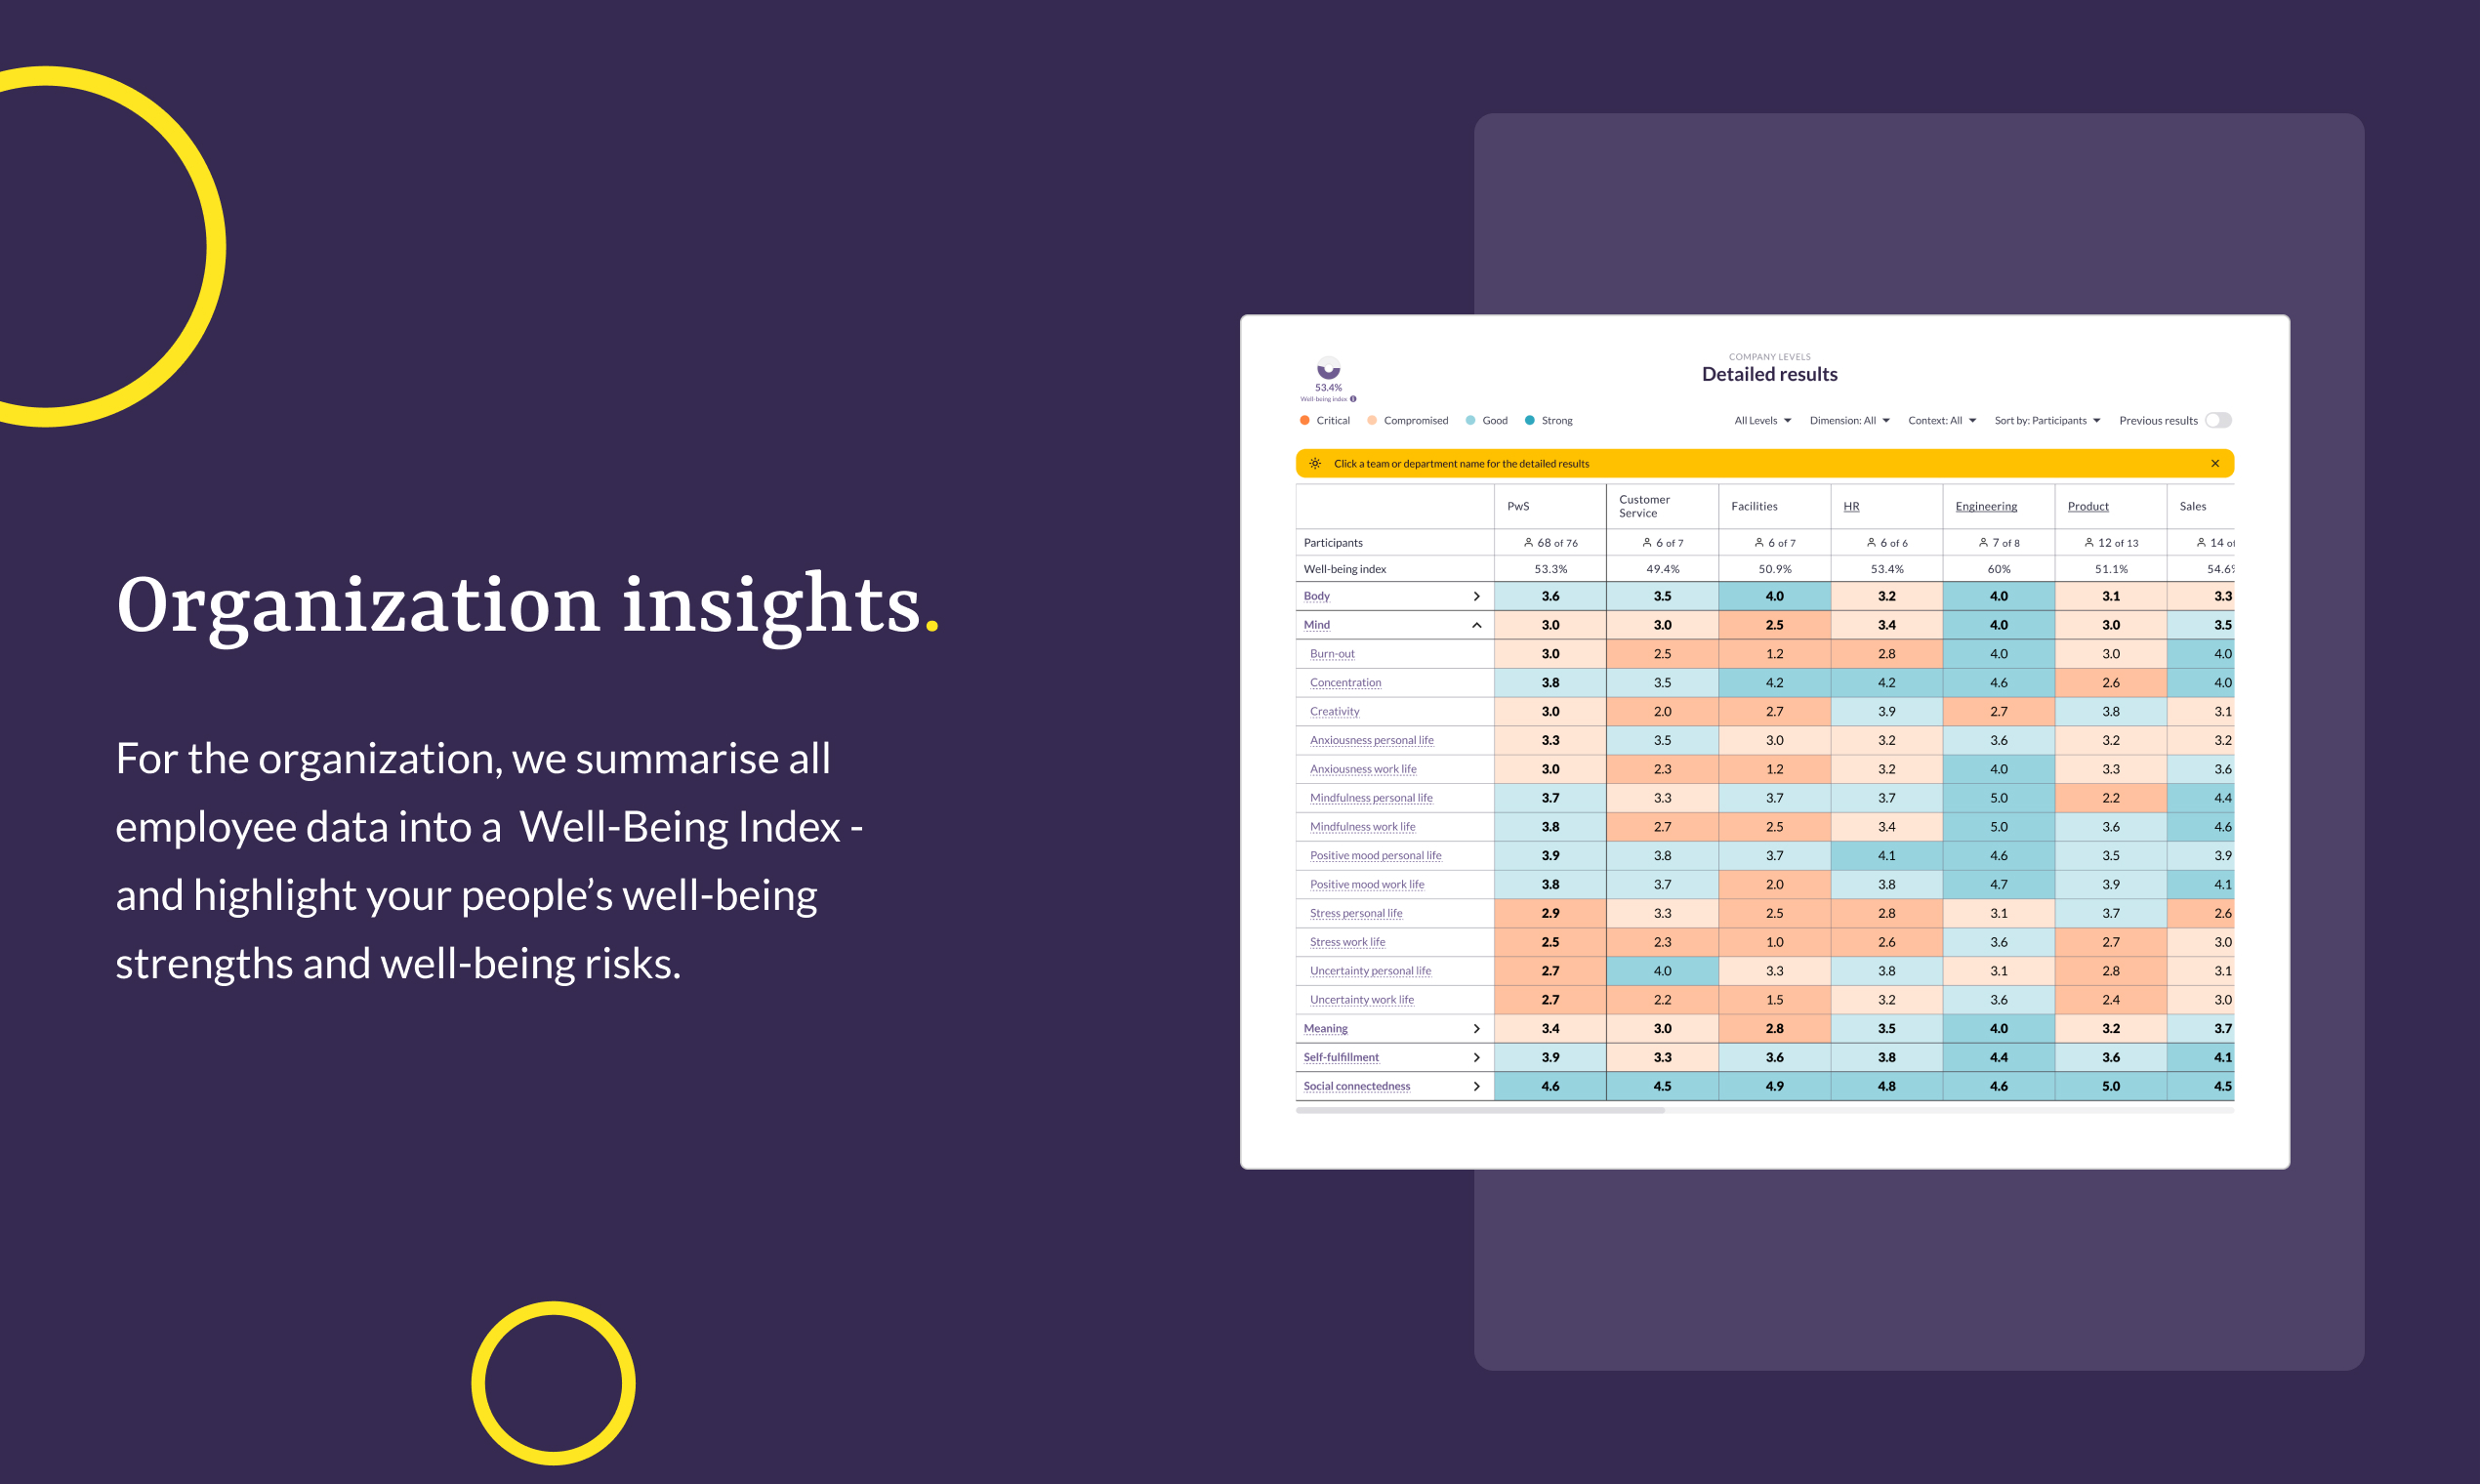 Companies have an aggregate view of all their employee well-being data so that they can monitor and prevent critical situations while also measuring the ROI and impact of their well-being spend.